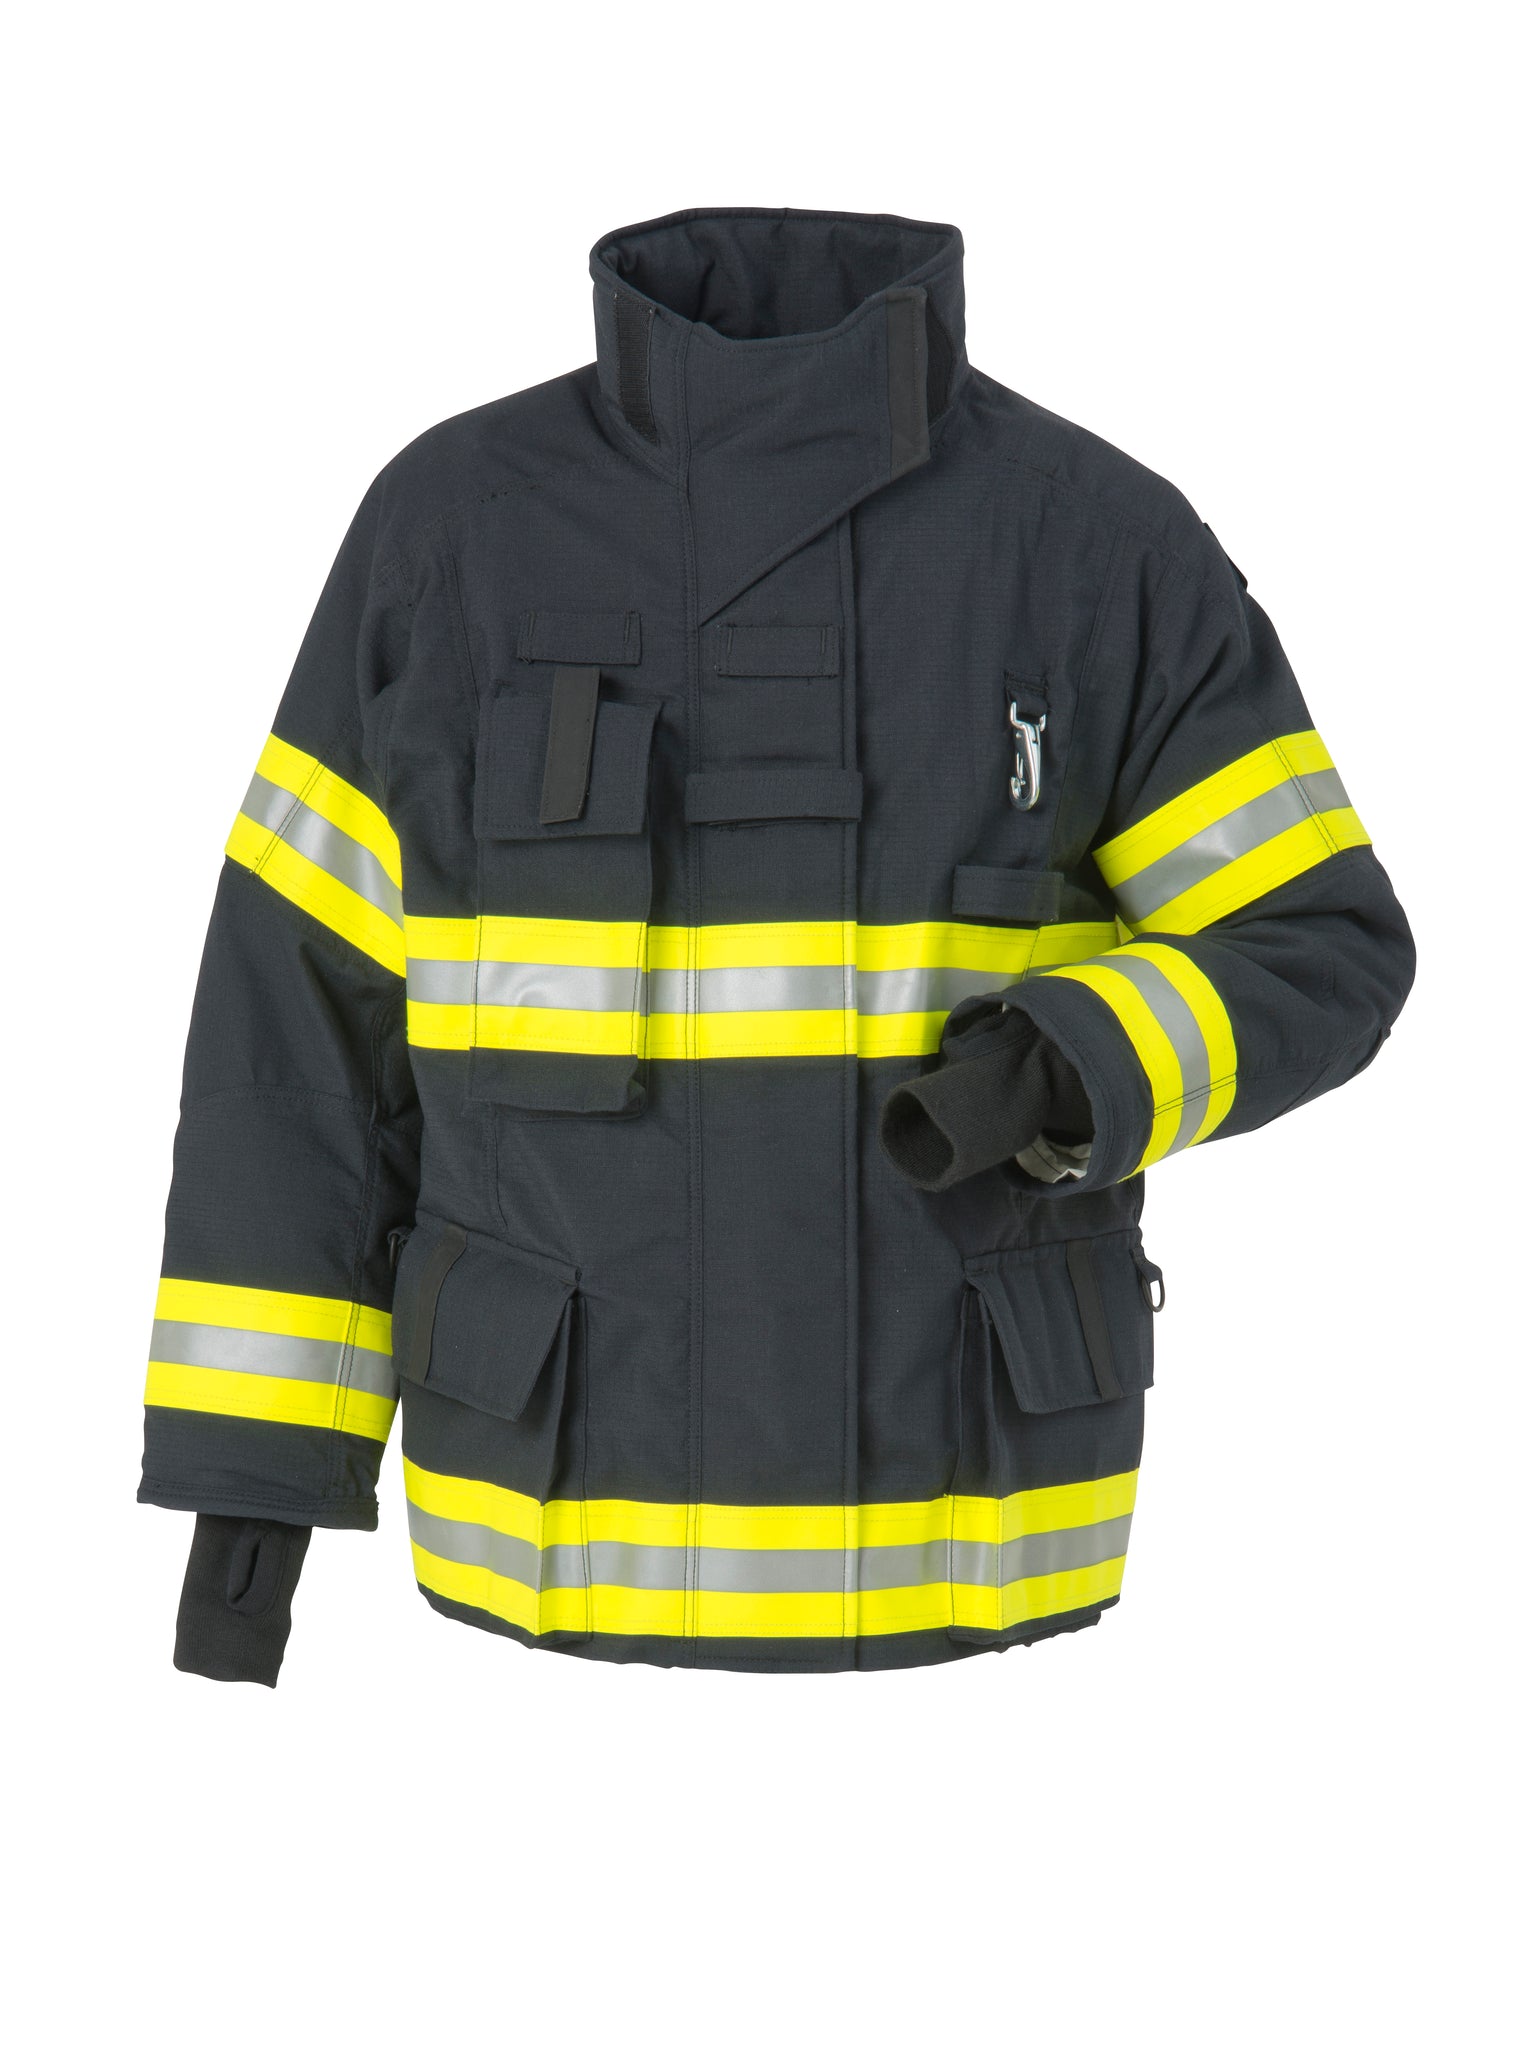 Viking Warrior NFPA Turnout Gear – Jersey Shore Rescue Tools